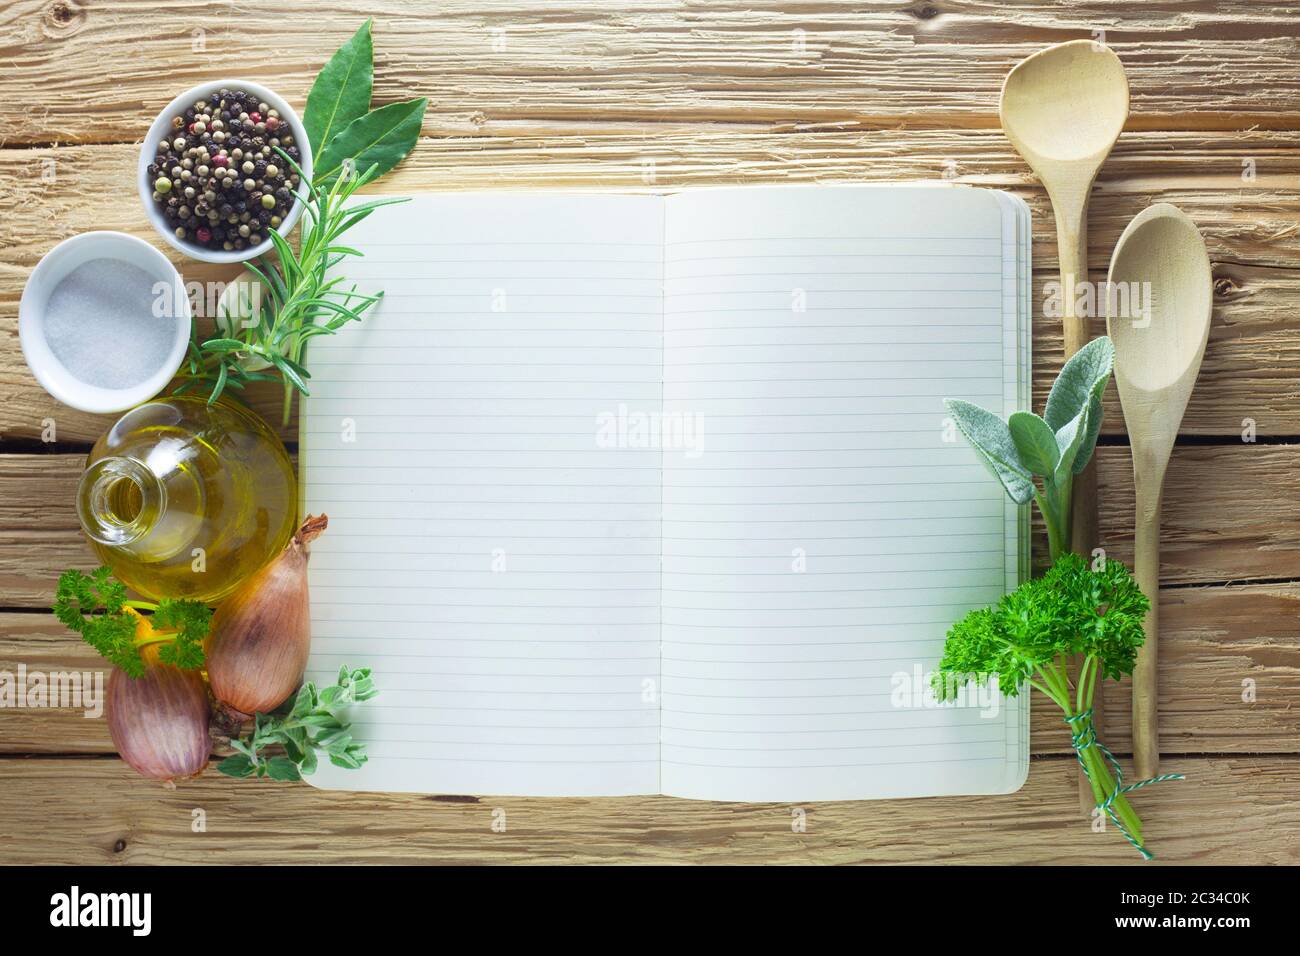 https://c8.alamy.com/comp/2C34C0K/open-recipe-book-surrounded-by-various-ingredients-on-a-wooden-background-2C34C0K.jpg